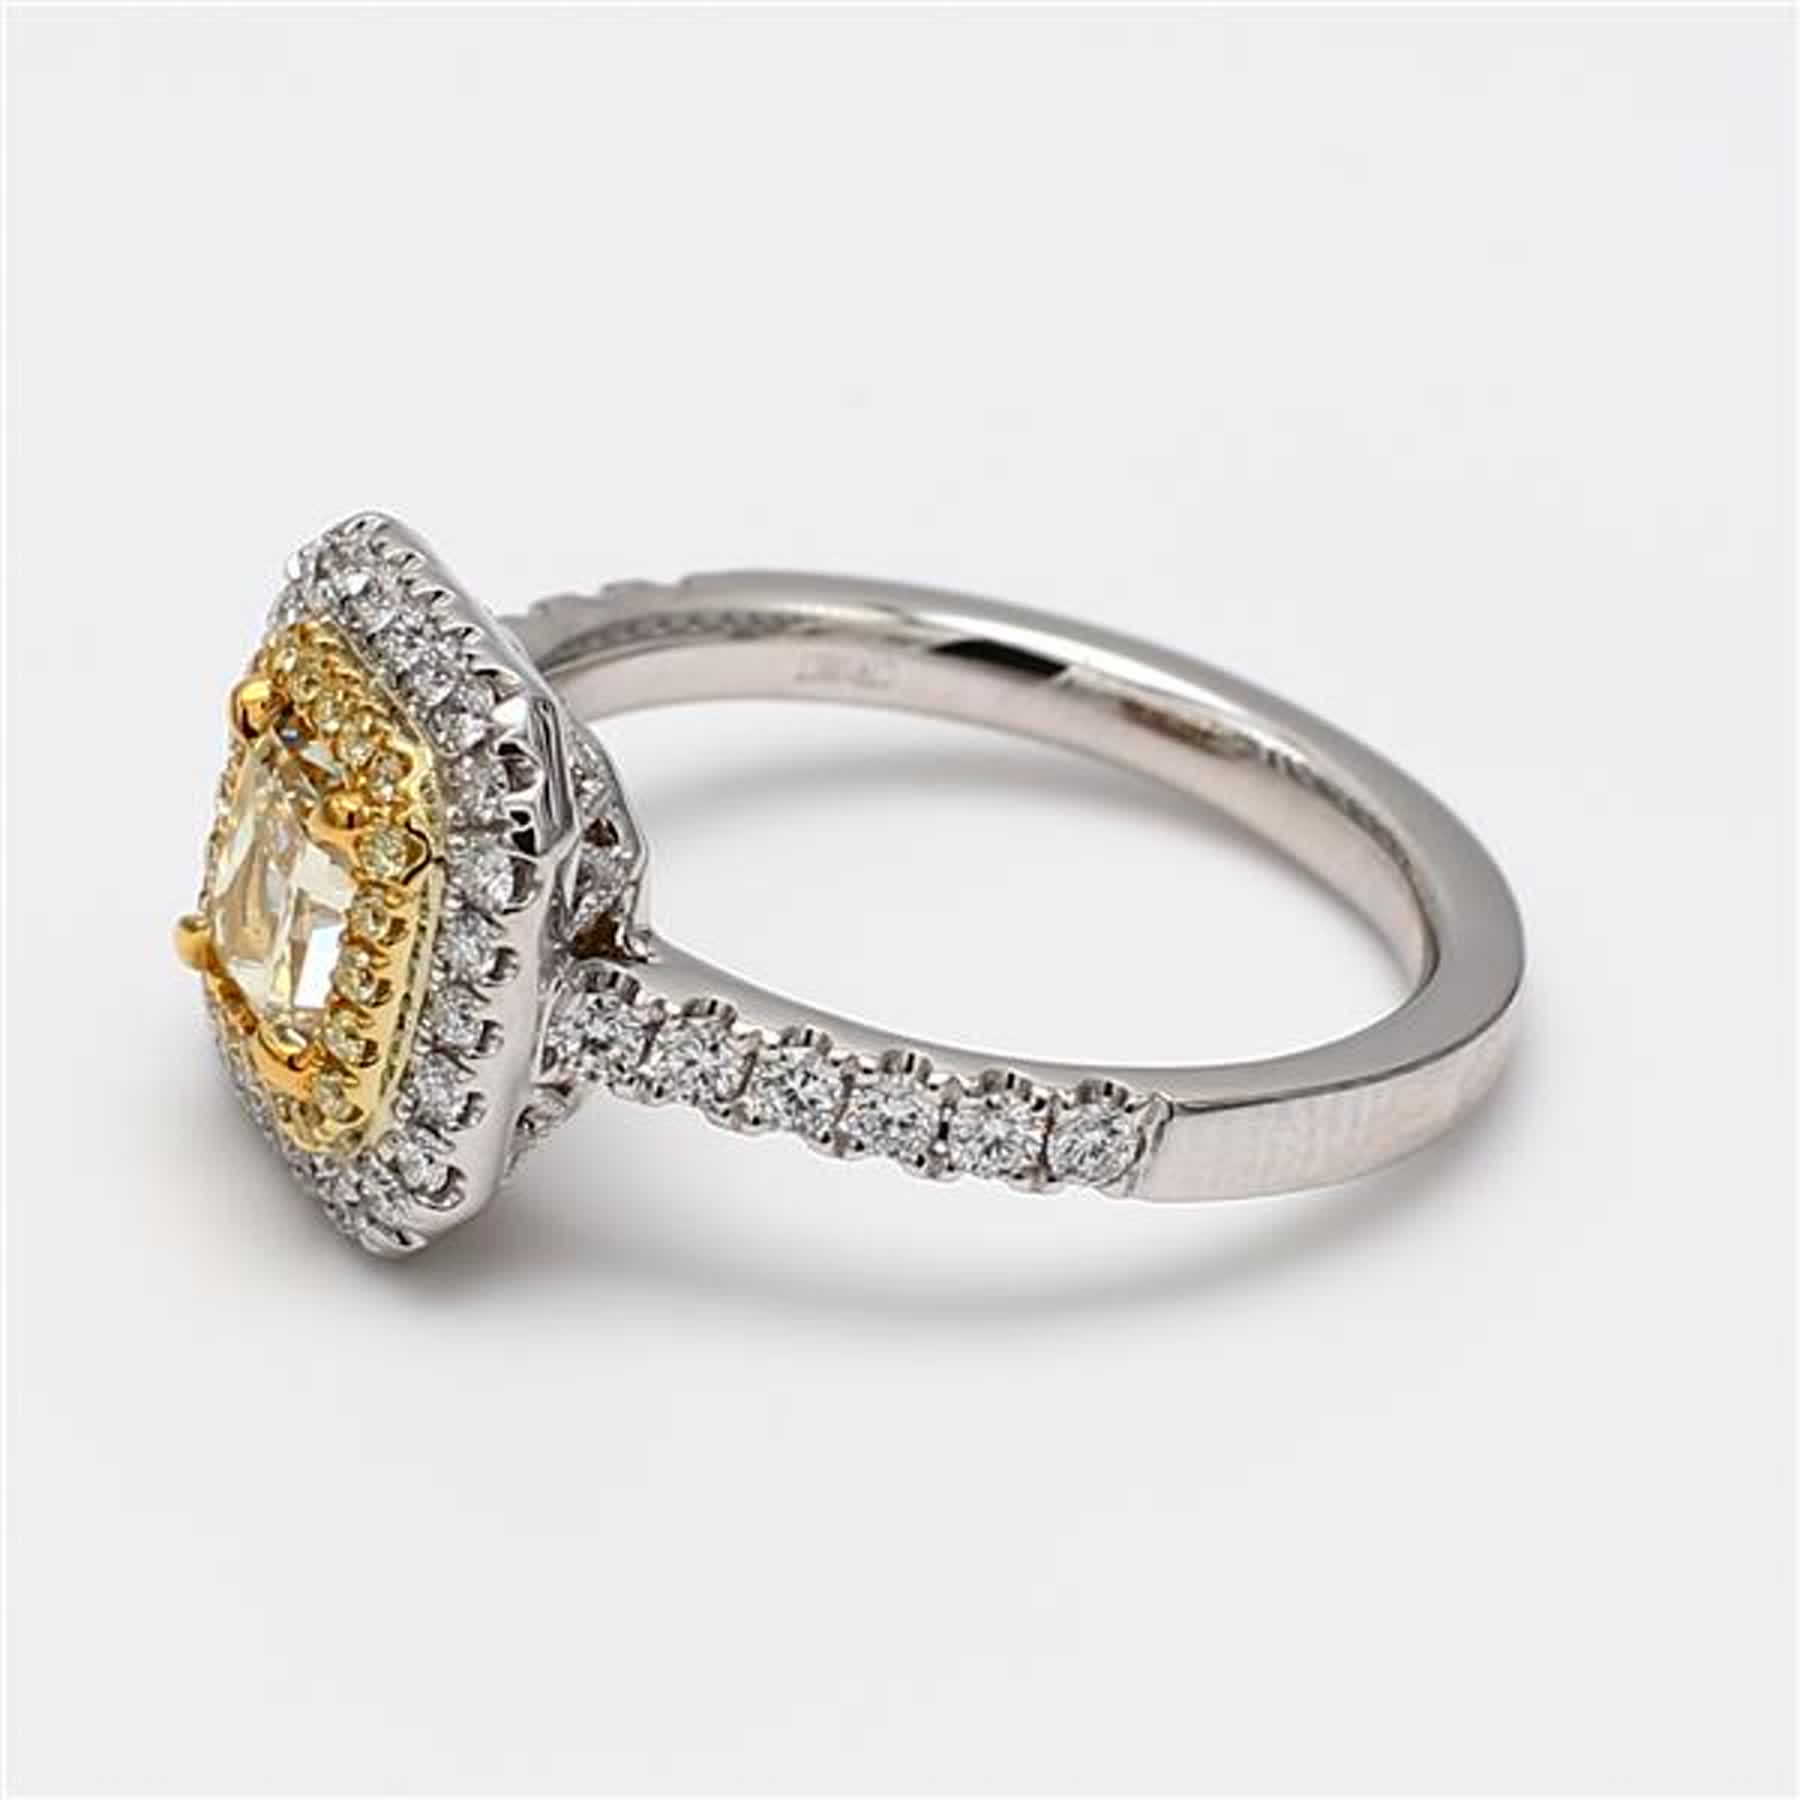 GIA Certified Natural Yellow Radiant and White Diamond 1.54 Carat TW Plat Ring